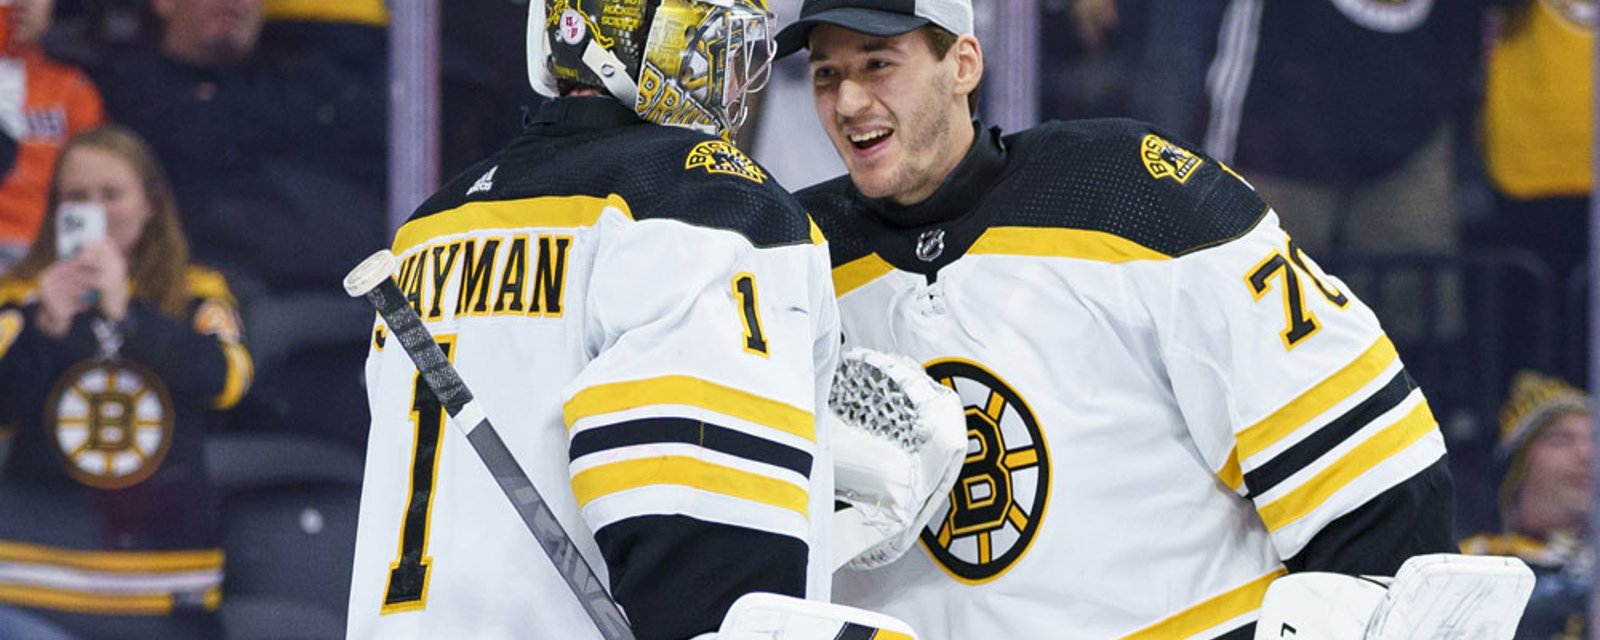 Bruins sign goaltender Bussi to a contract extension